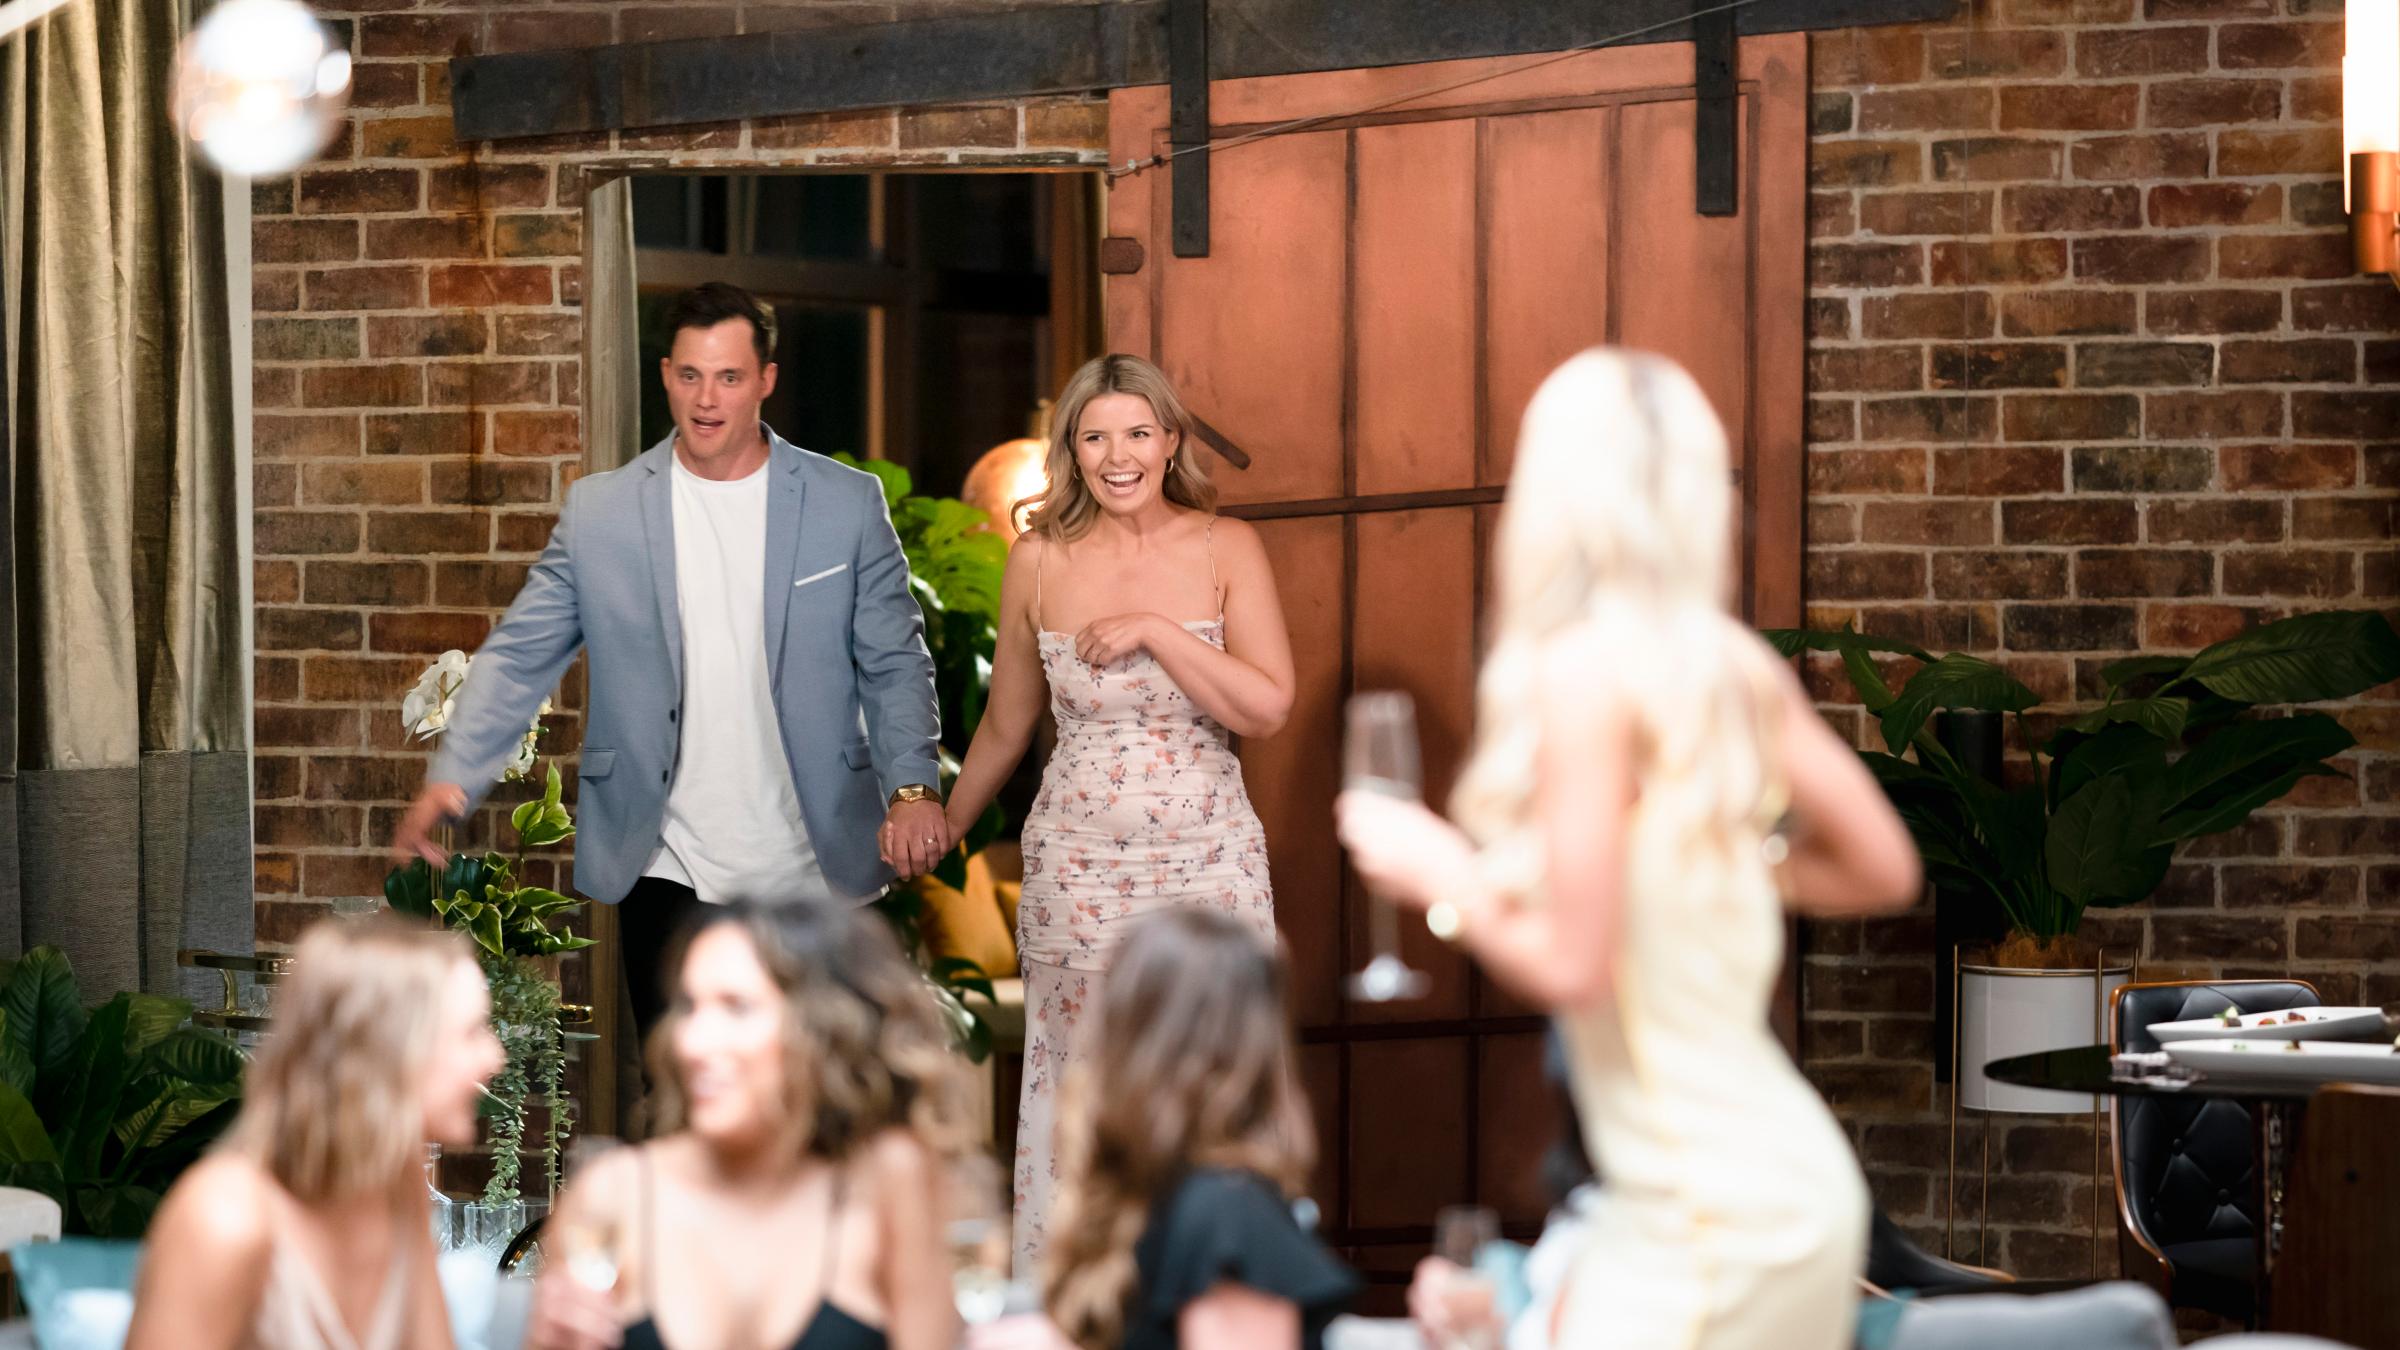 Find Out Which MAFS Couples Are Still Together At The End In This